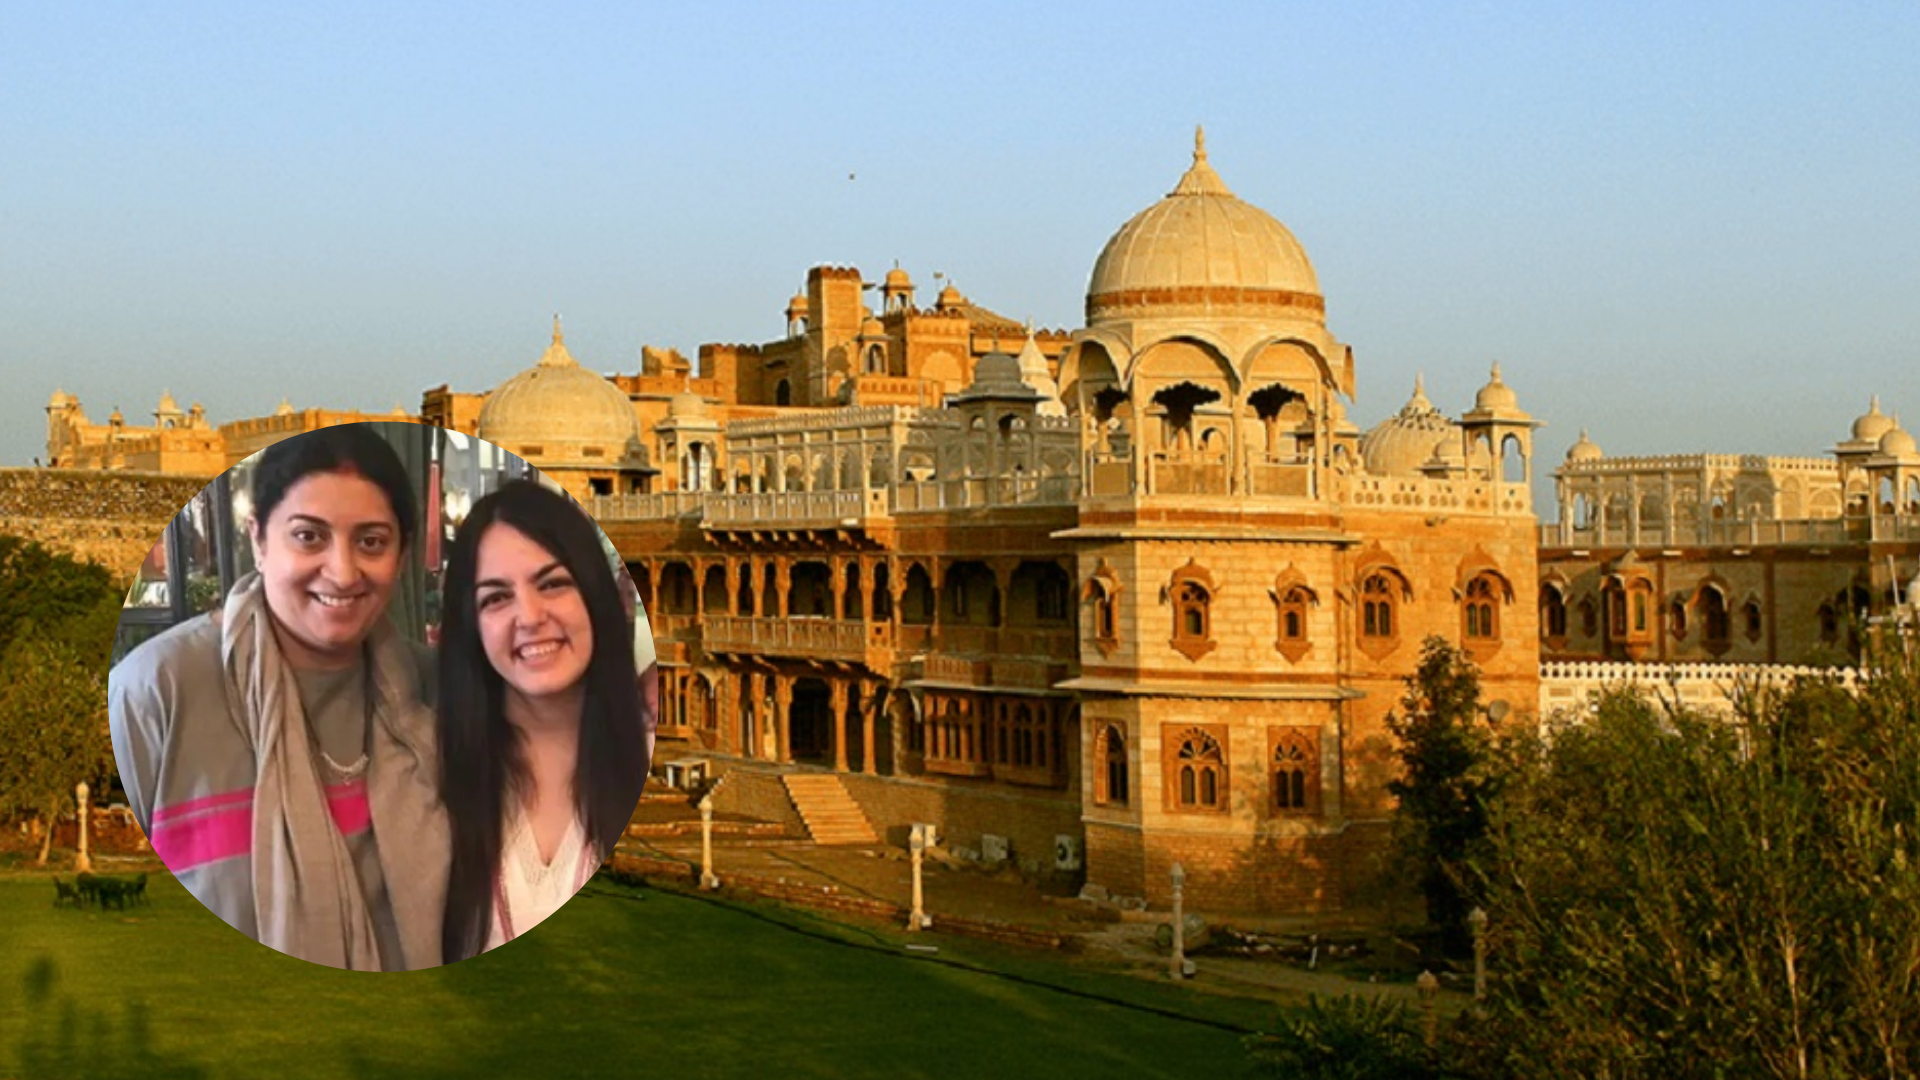 Smriti Irani's daughter Shanelle Irani to exchange vows in 500-yr-old Khimsar Fort in Rajasthan - deets here